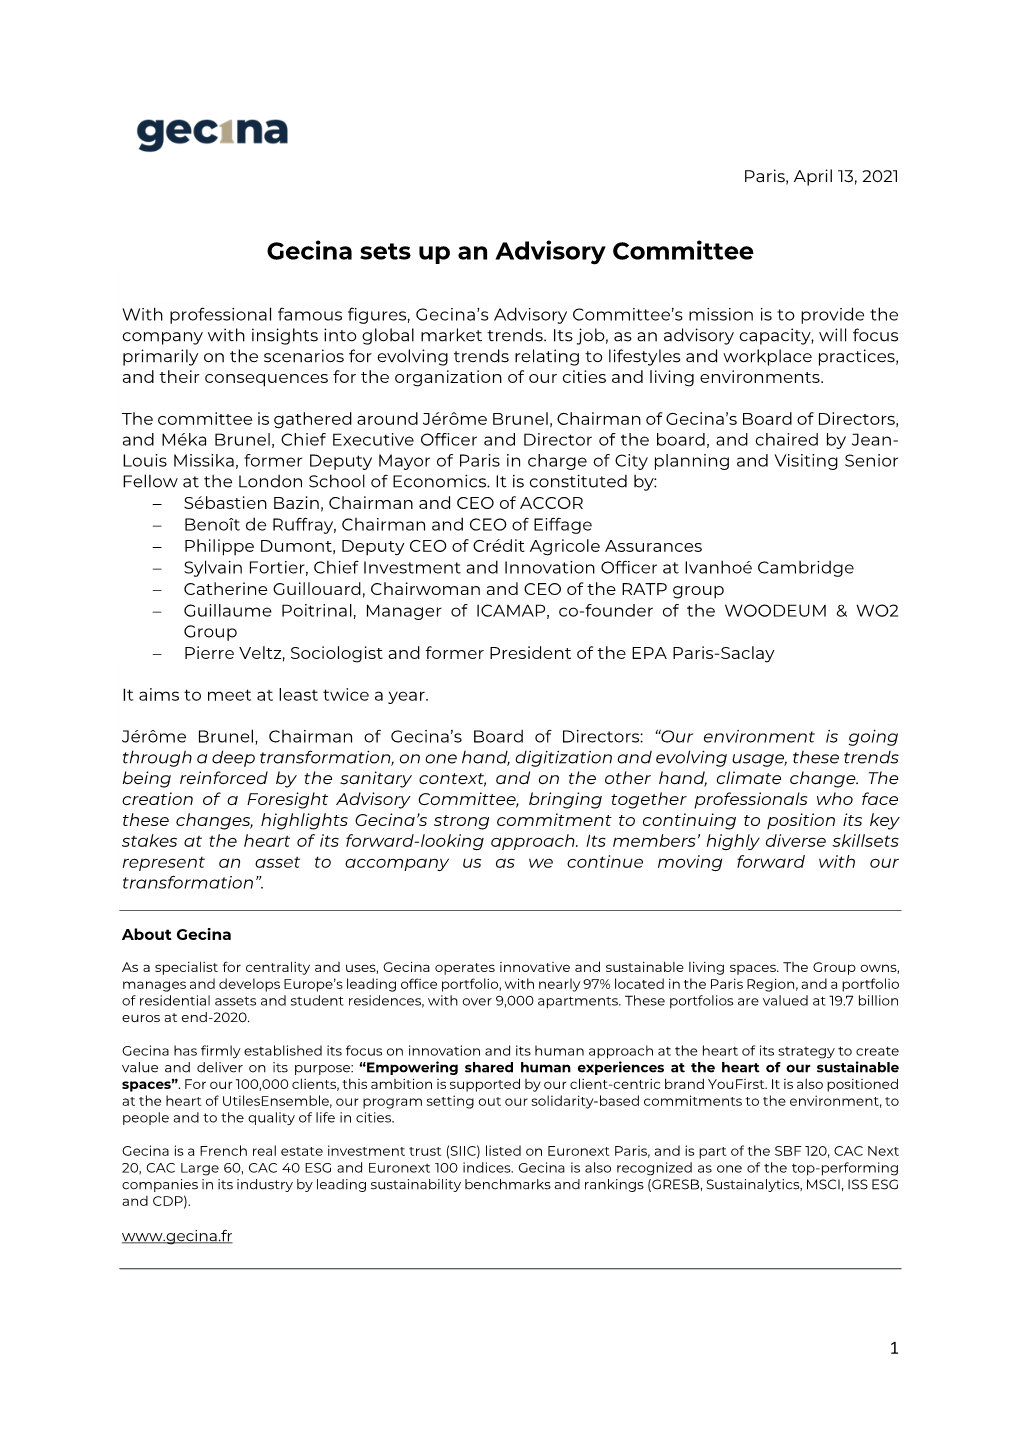 Gecina Sets up an Advisory Committee